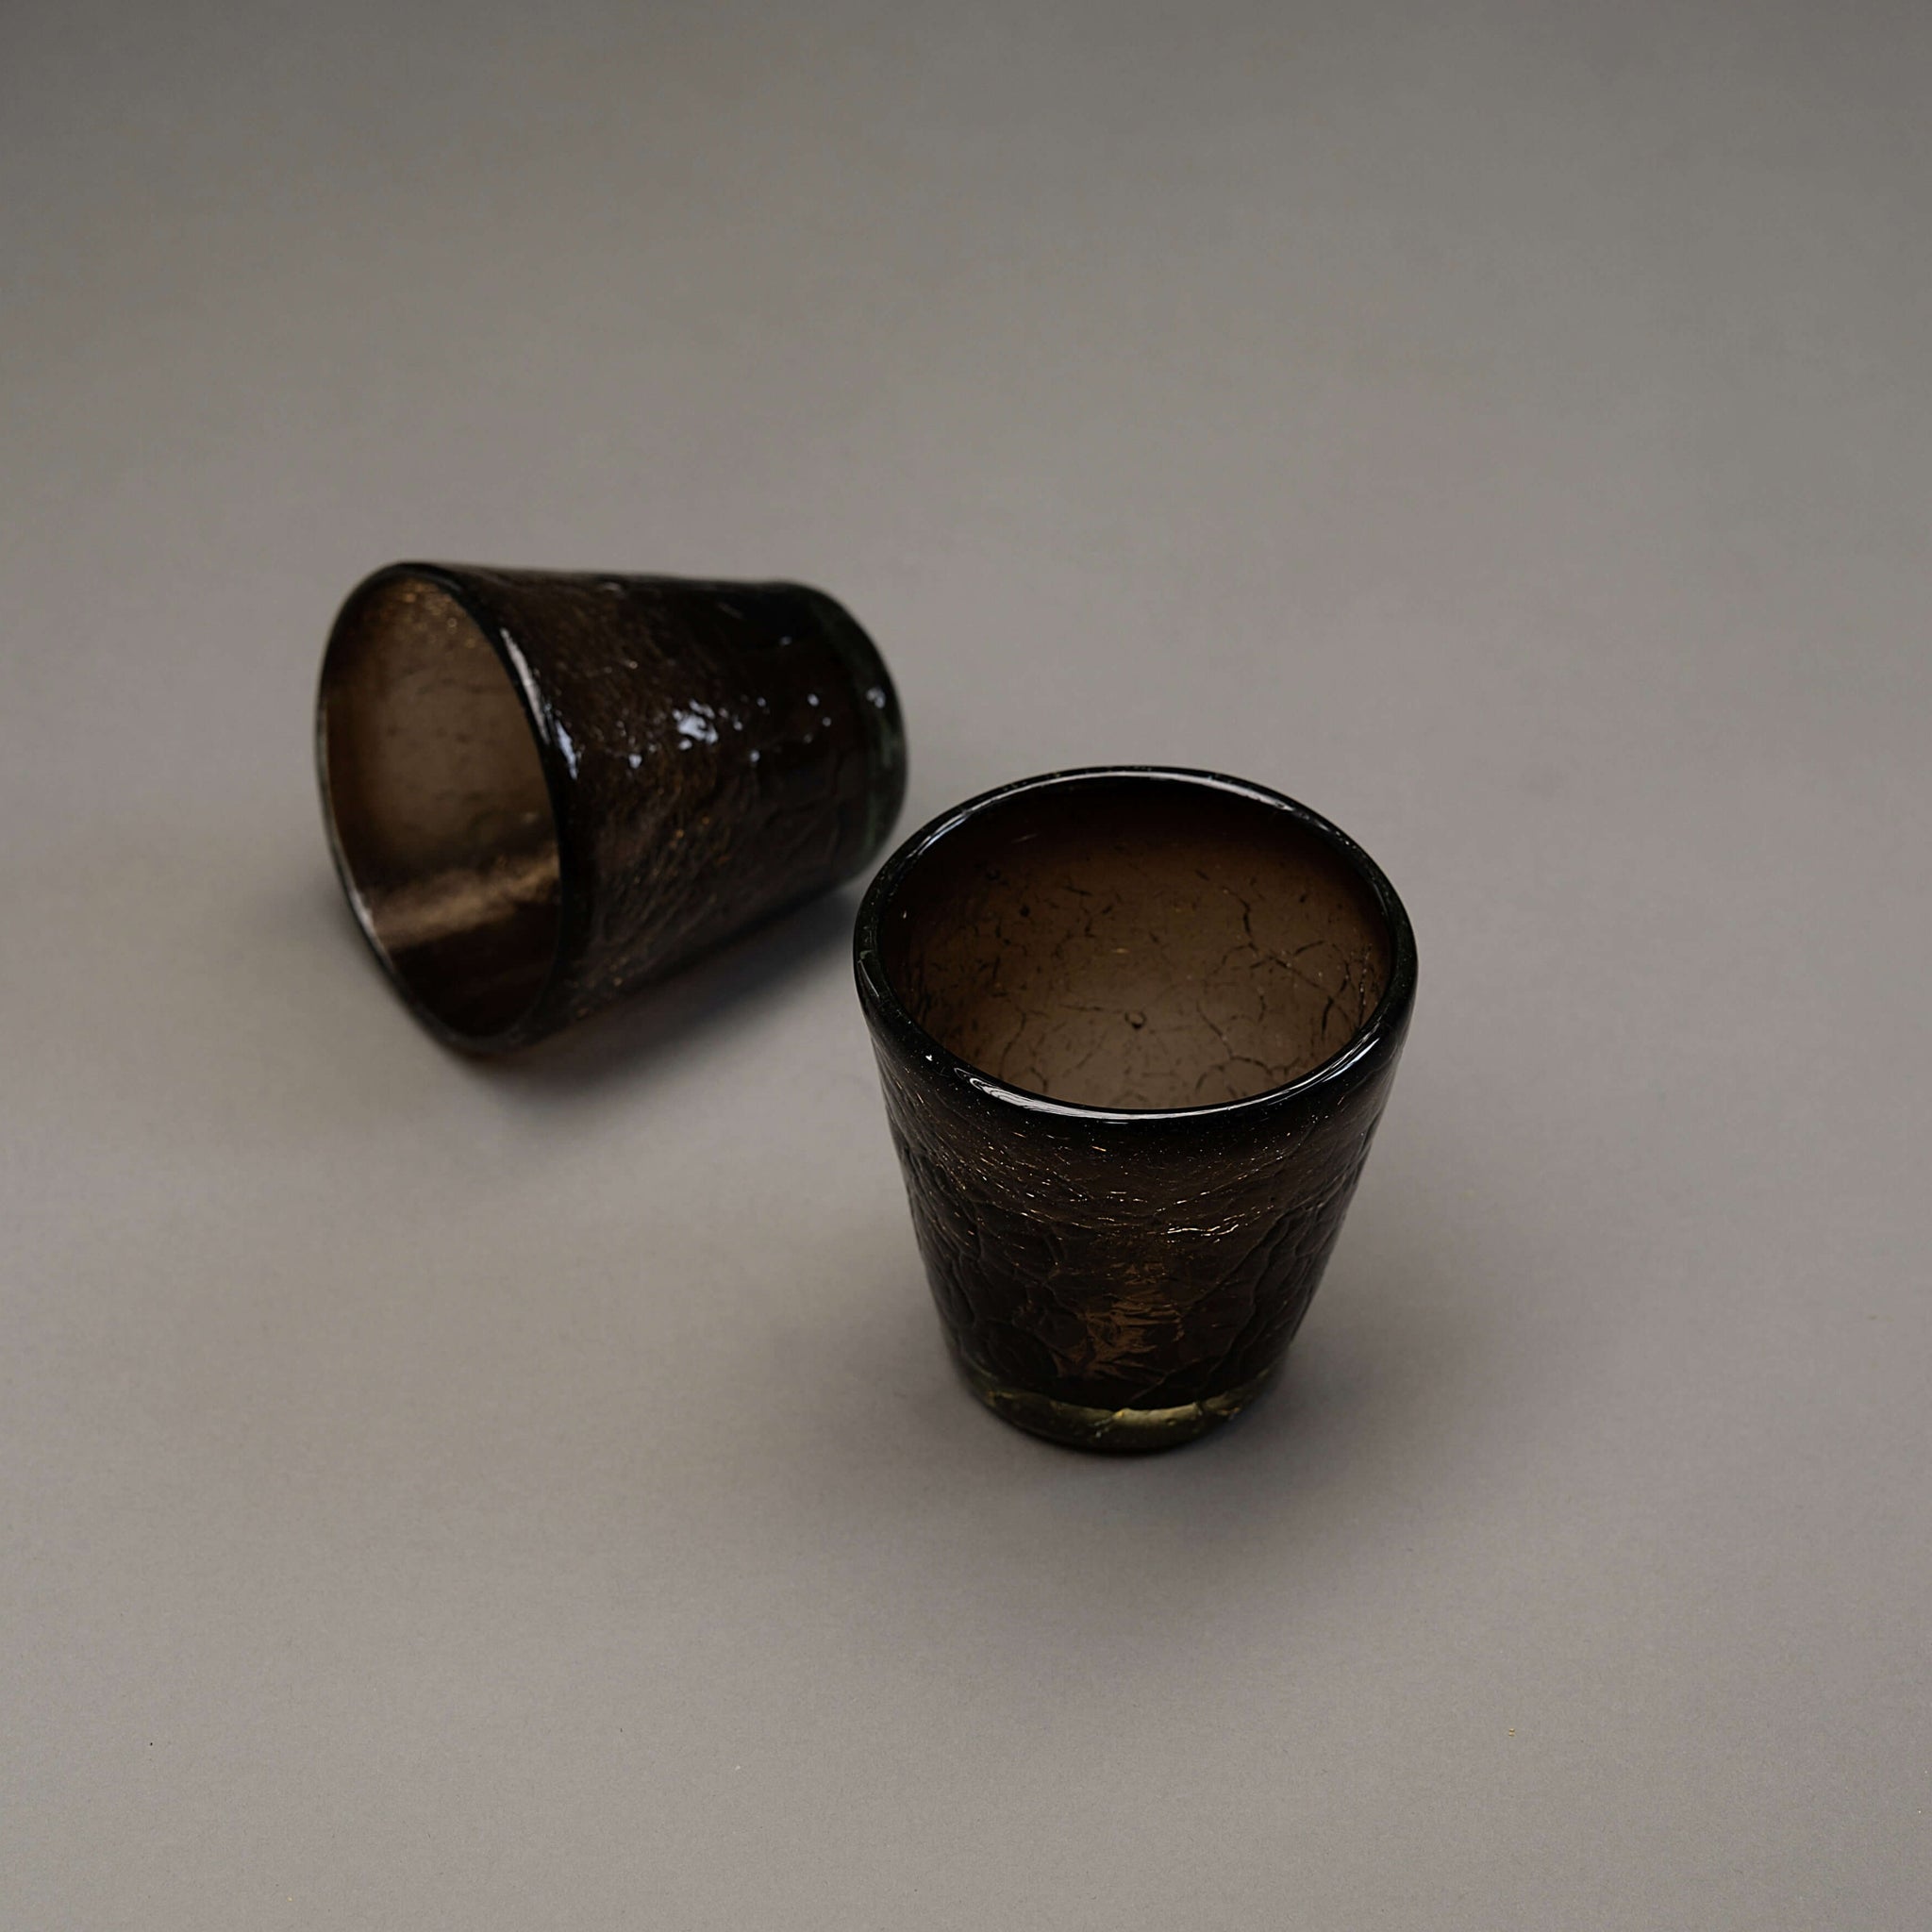 A set of 2 crinkly glasses with a v shape and a crackle finish.